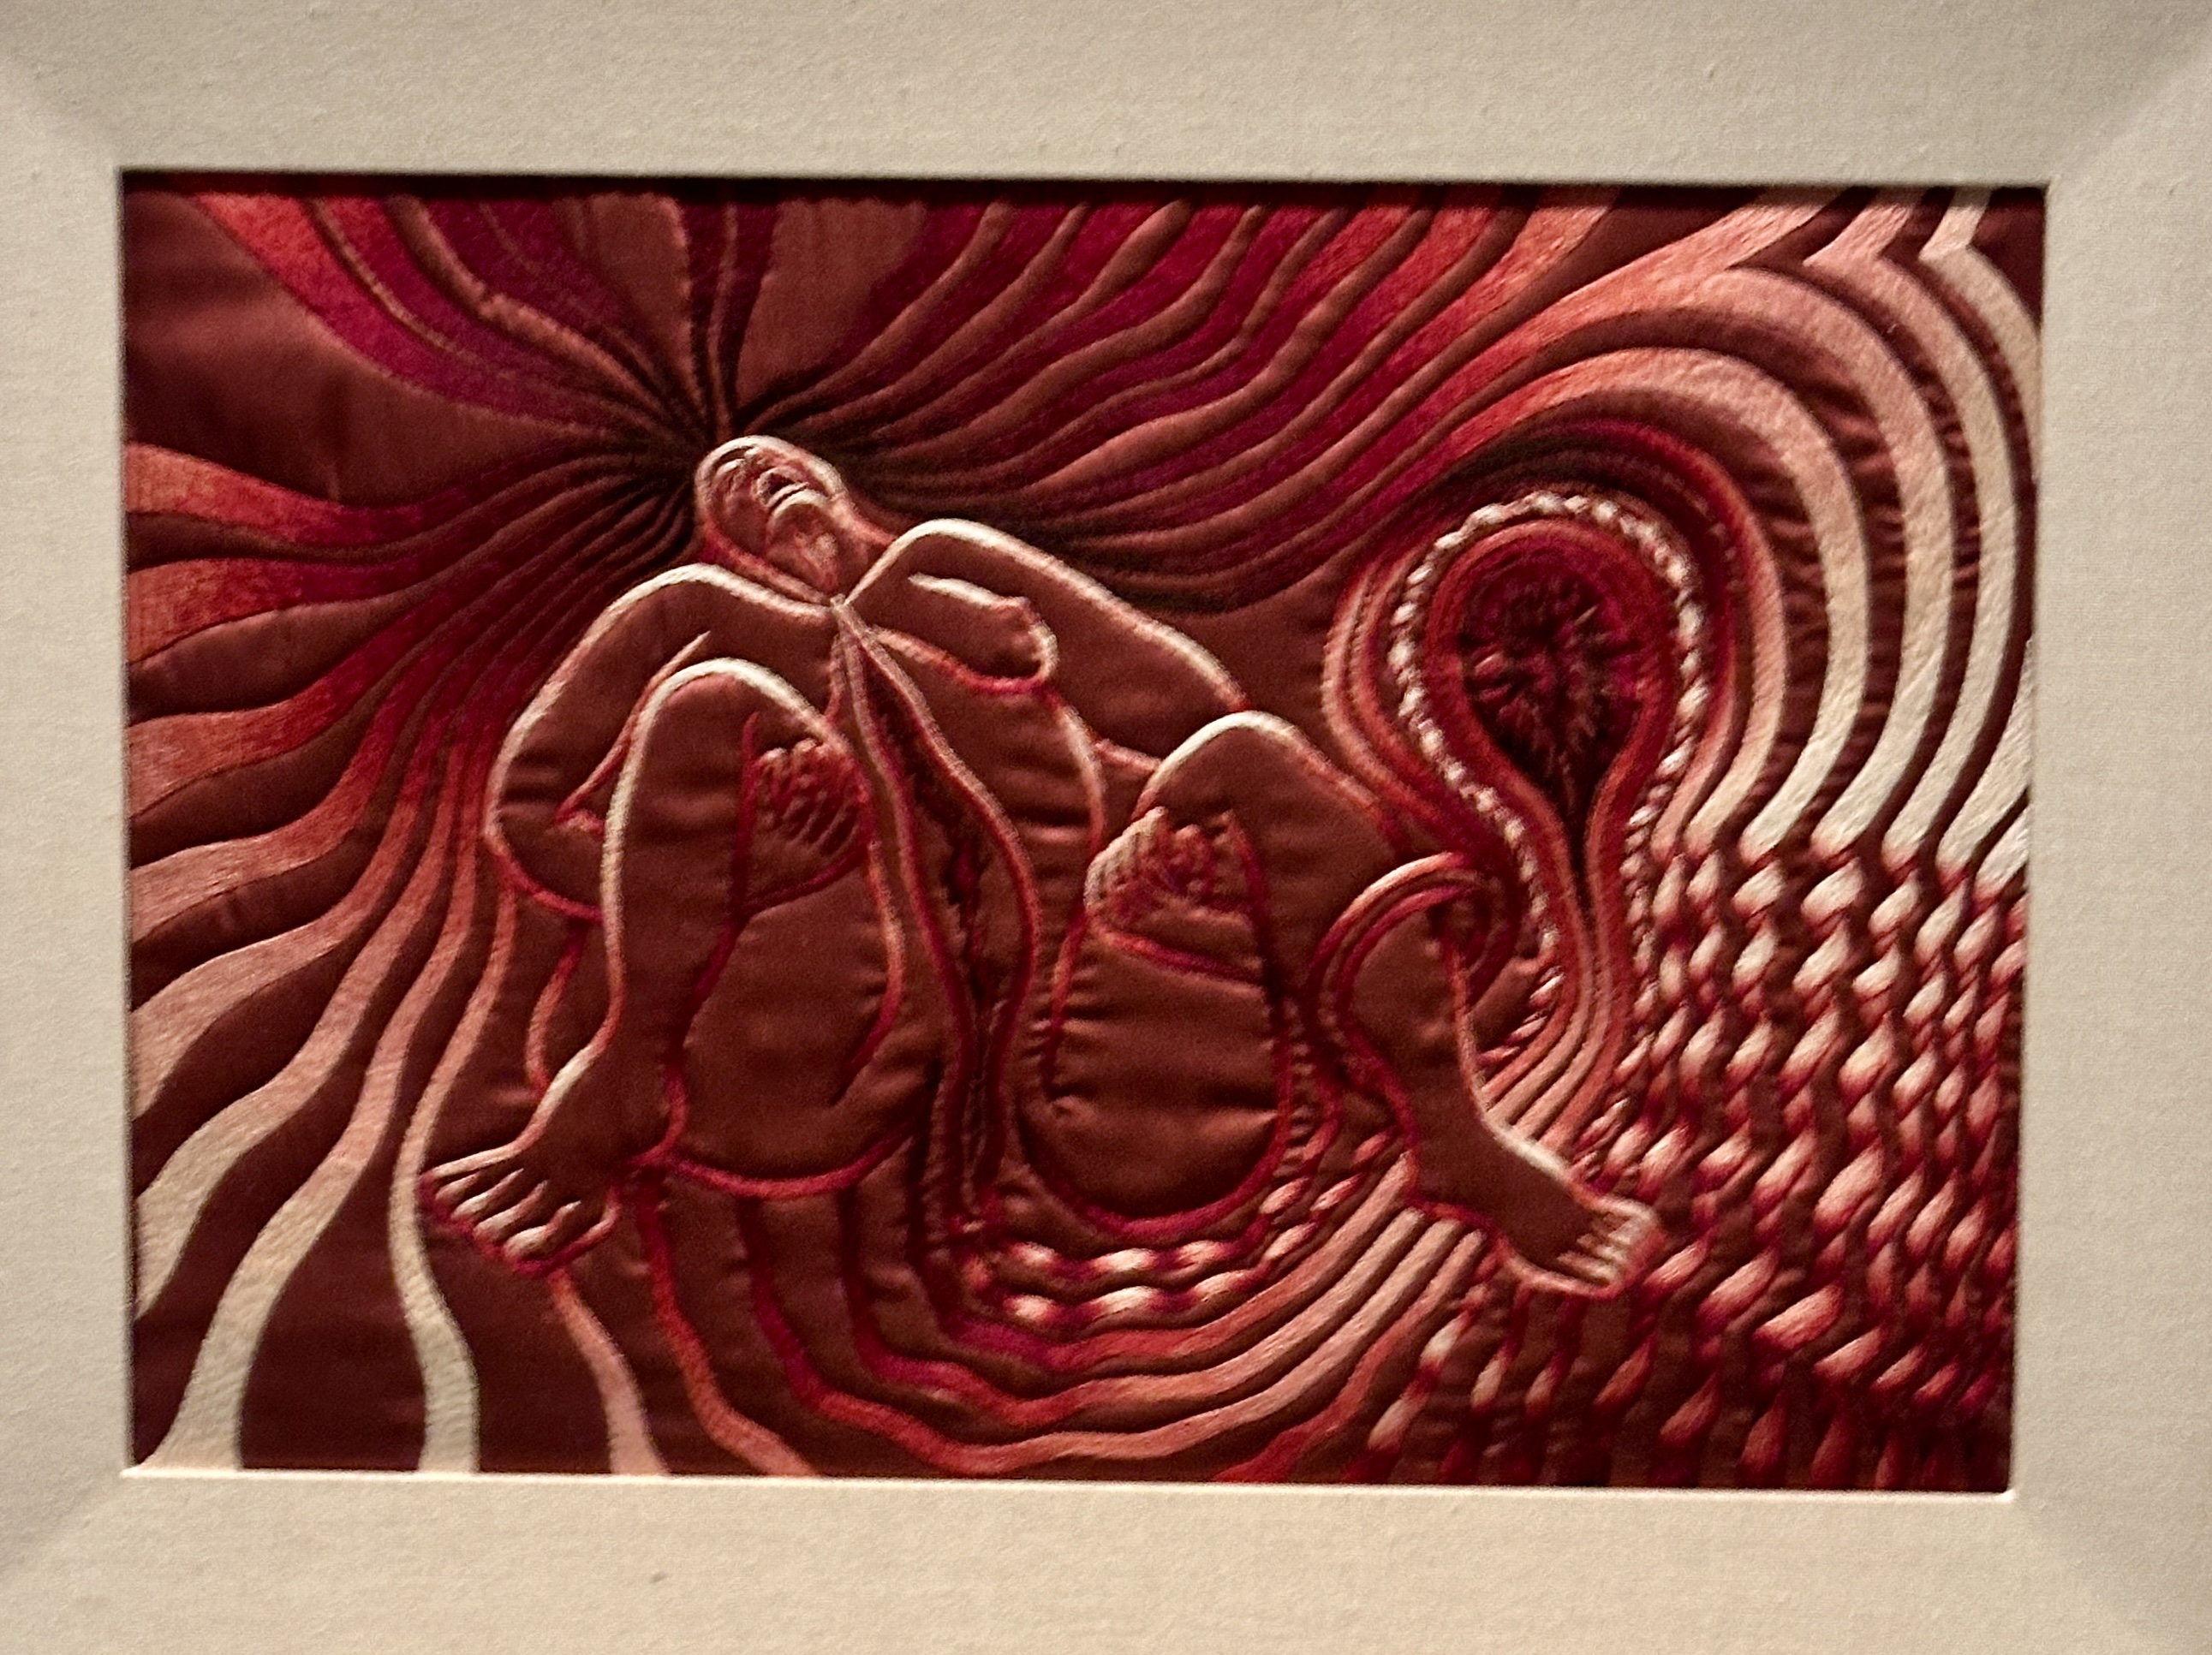 Unravel Exhibition at the Barbican - Judy Chicago